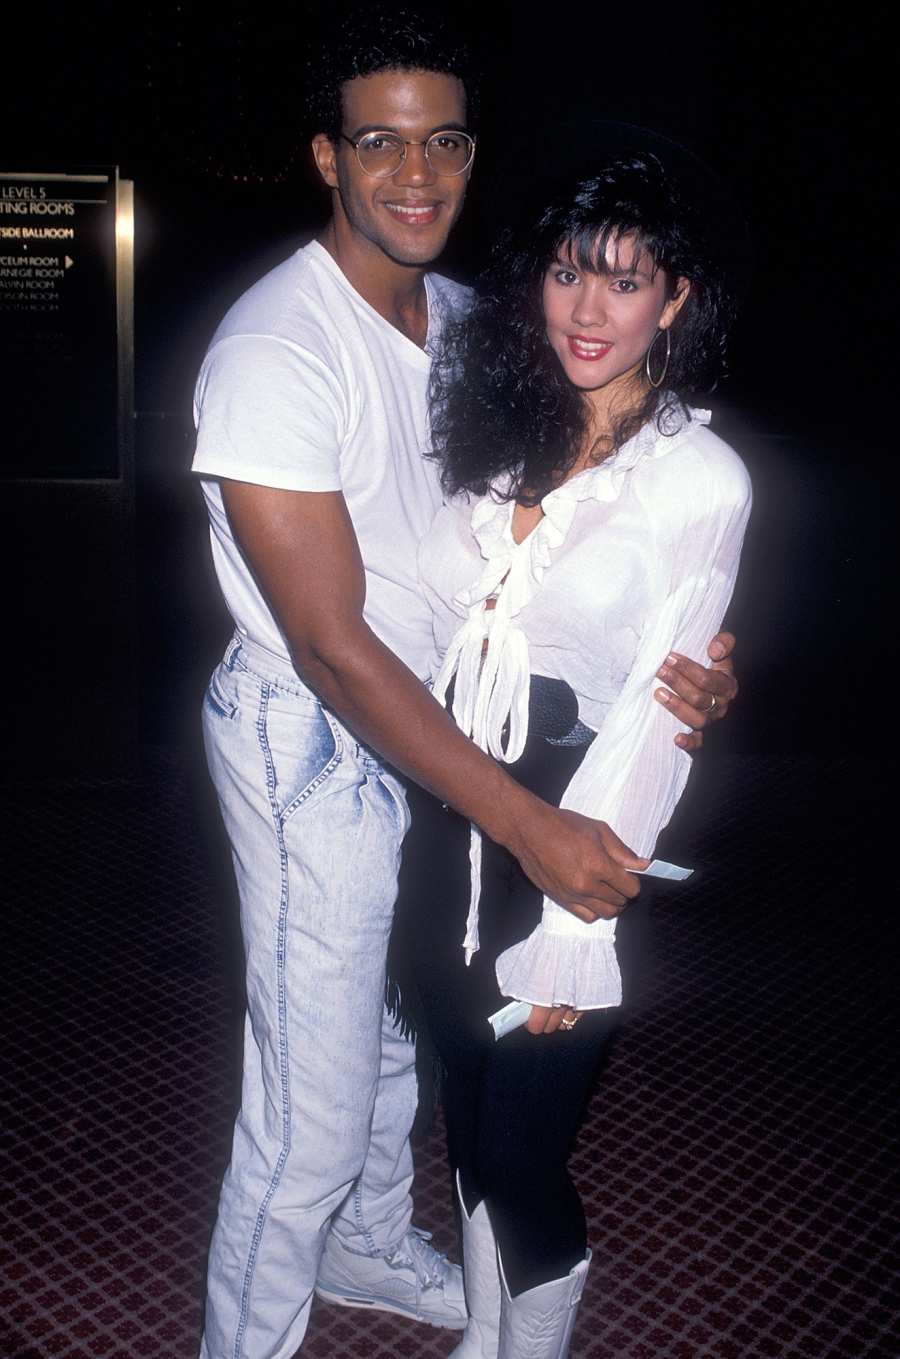 Kristoff St. John’s Life in Pictures